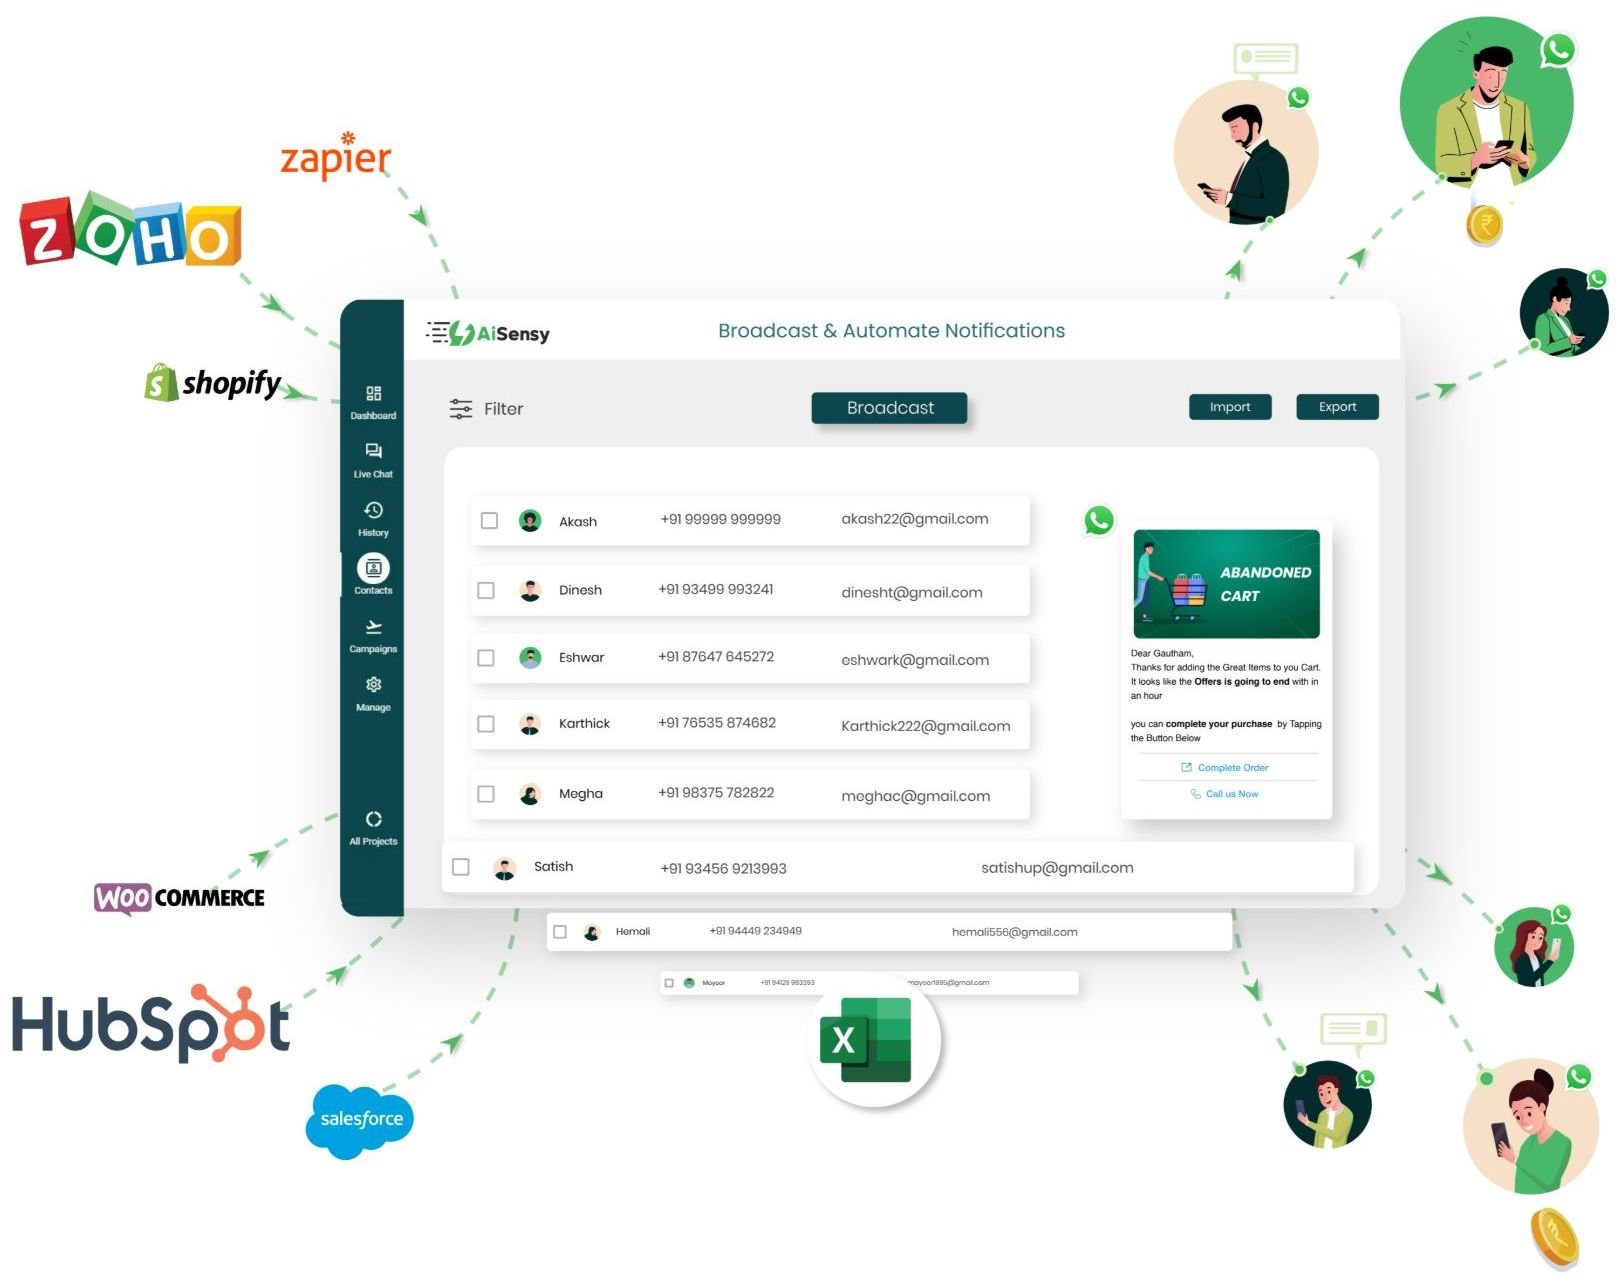 All crm's integrating with aisensy (1)